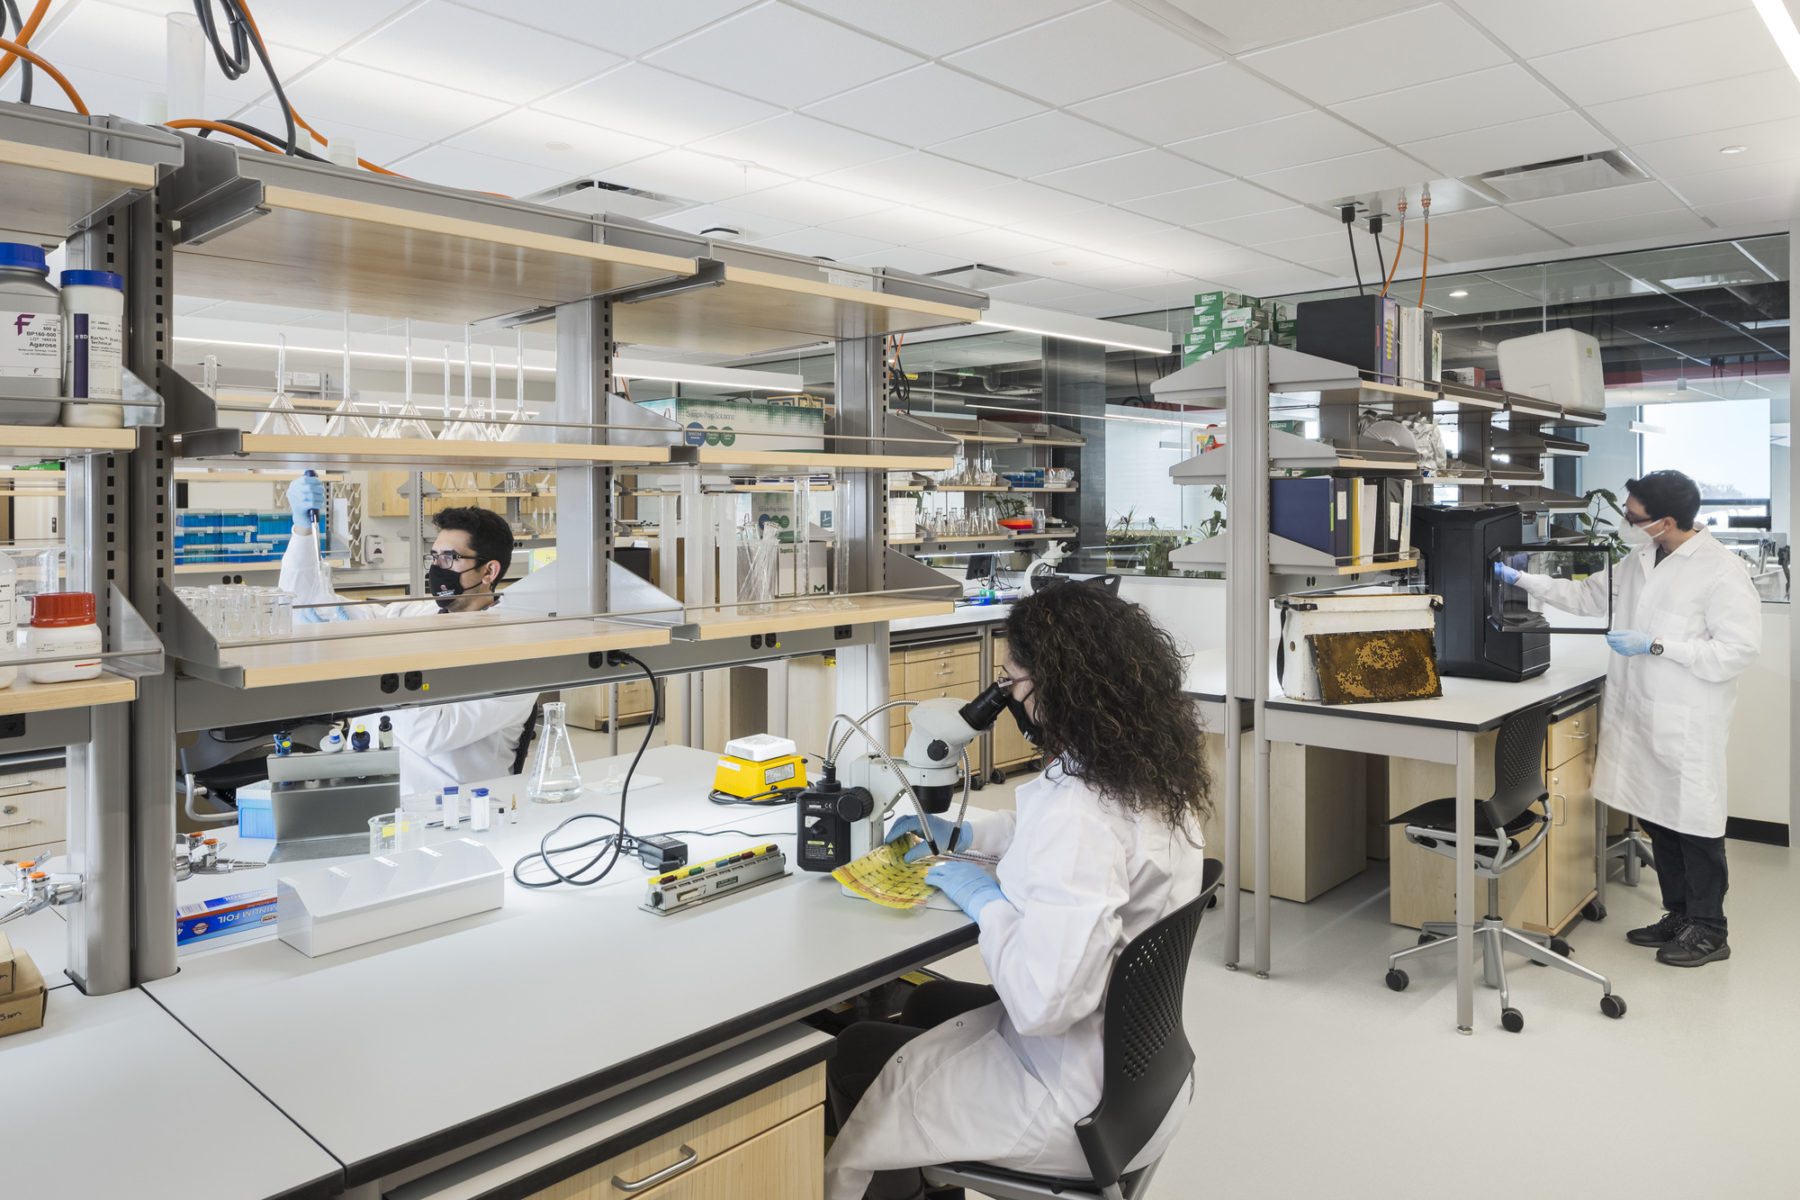 photo of lab space, in the foreground a woman in a lab coat looks into a microscope